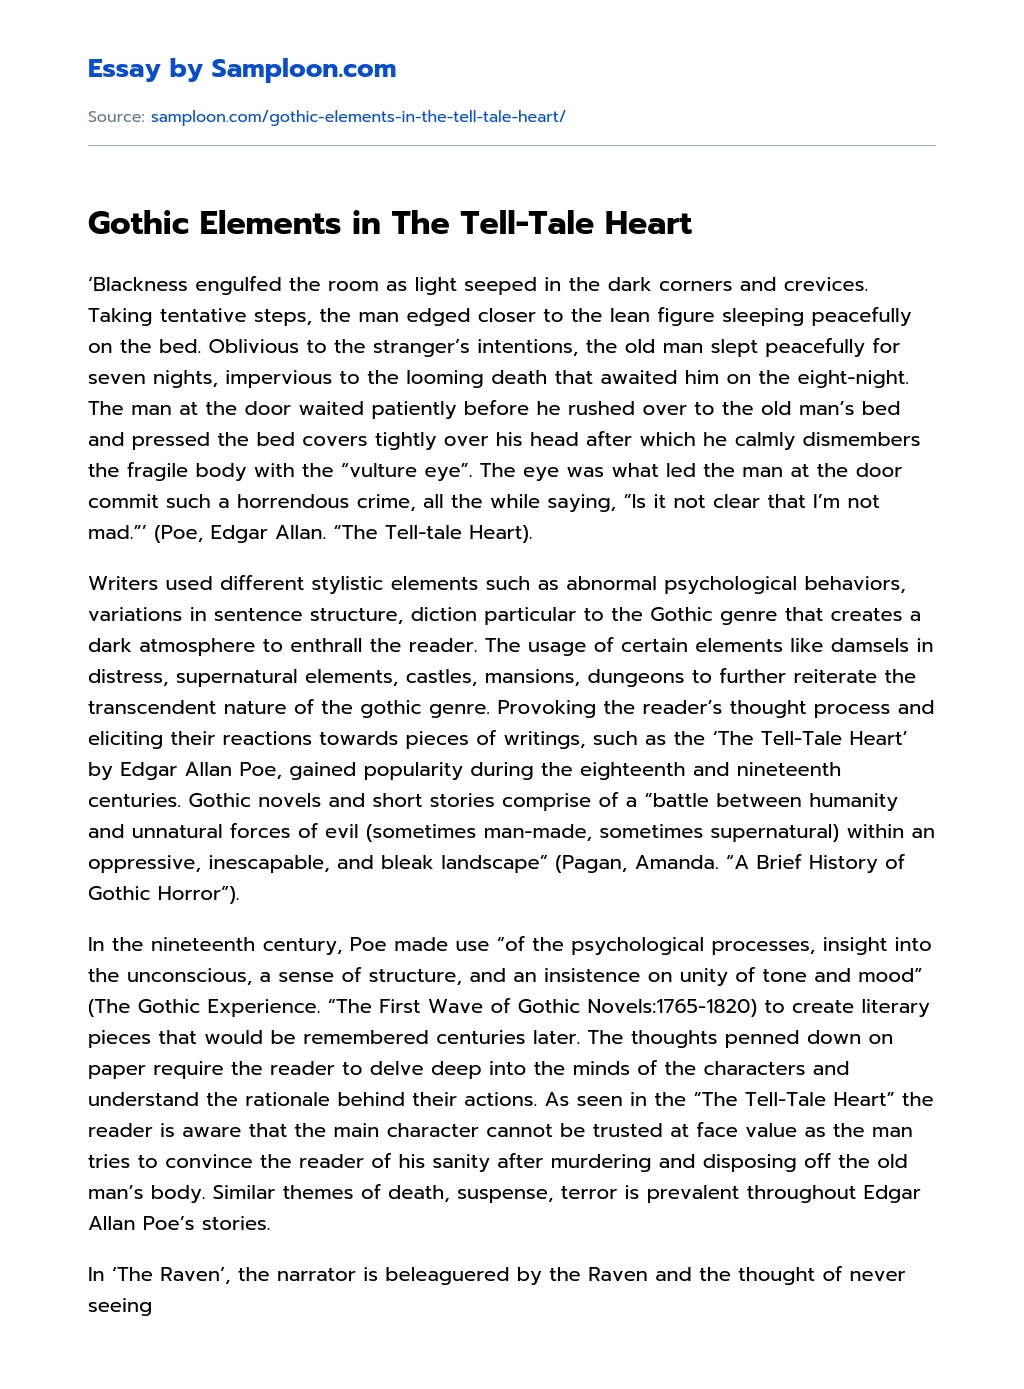 Gothic Elements in The Tell-Tale Heart Analytical Essay essay